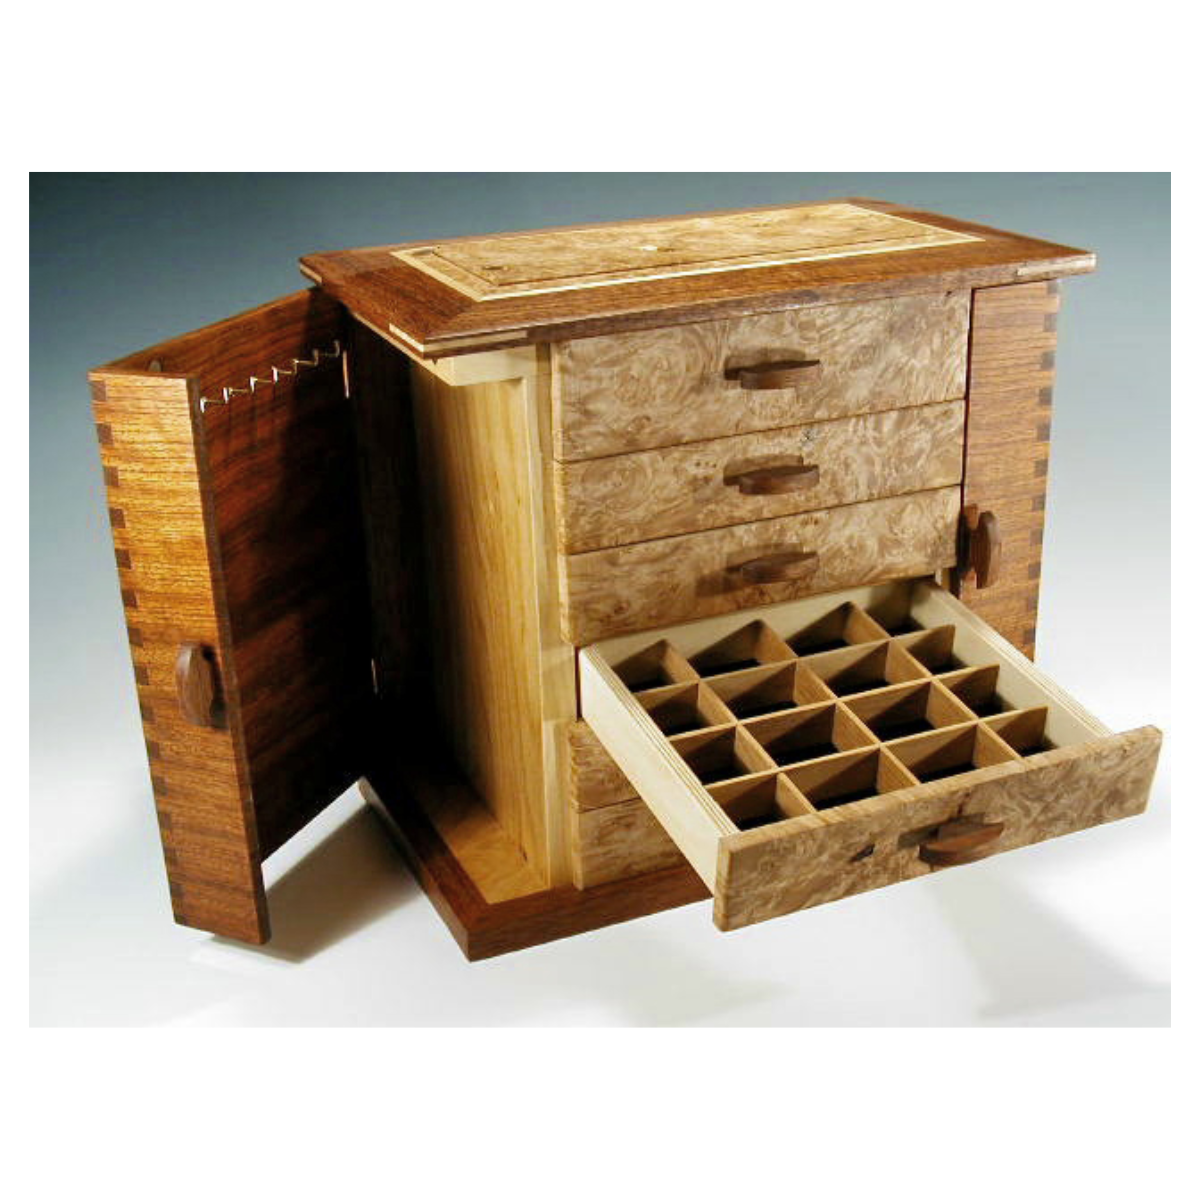 37. Handcrafted Wooden Keepsake Box: A Thoughtful 2nd Anniversary Gift for Him